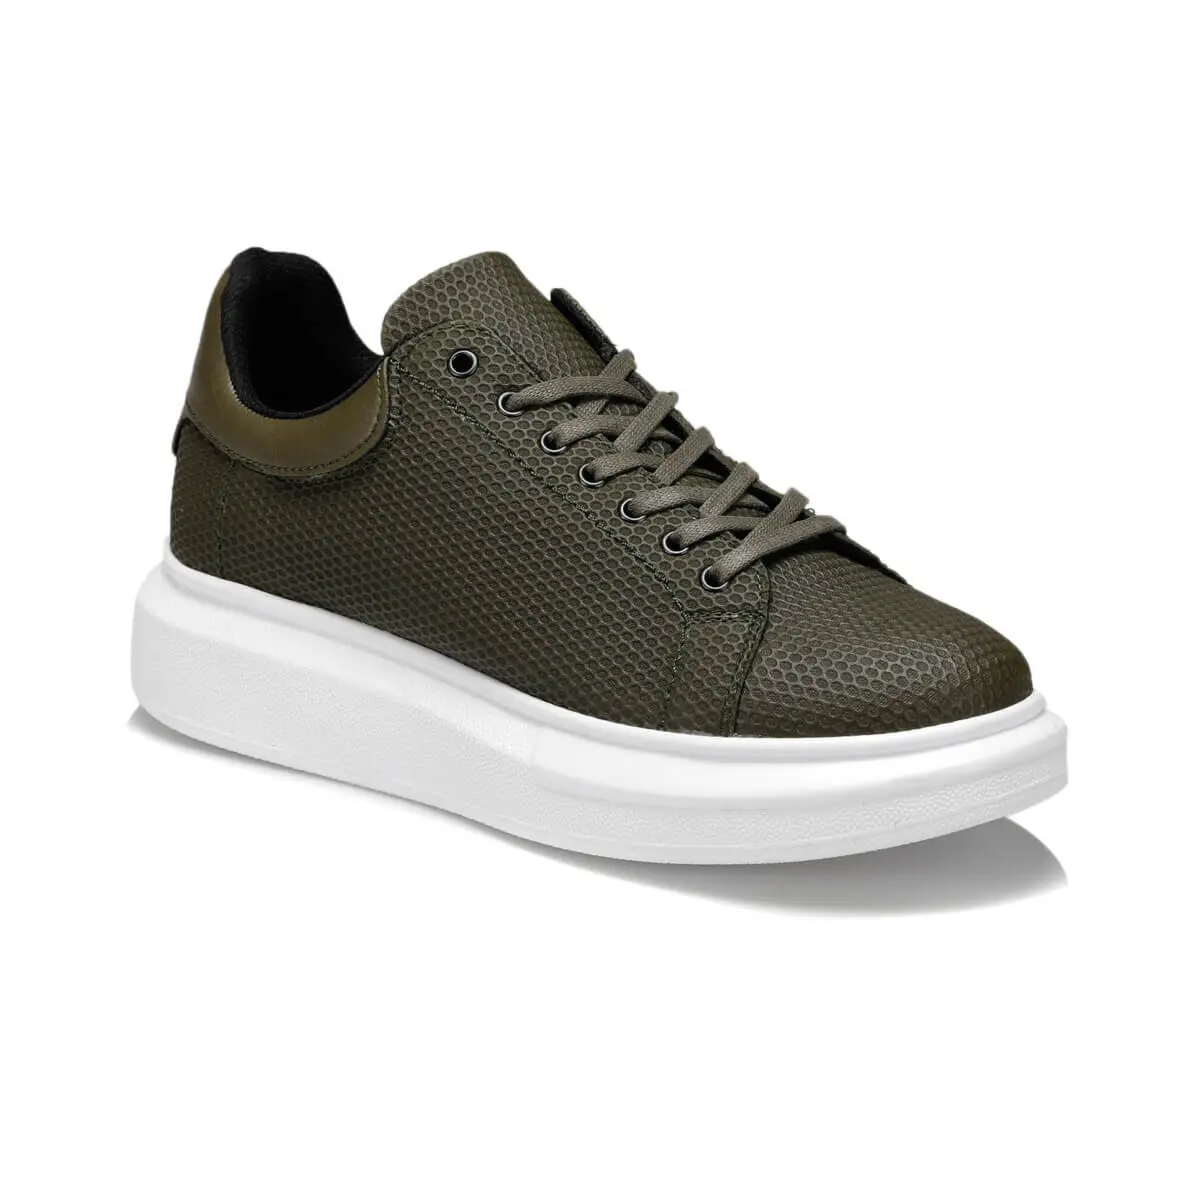 

FLO Men Sneakers Black Khaki Fashion Casual Comfortable Sport Daily Use Shoes Мужская обувь MNA-1 Forester